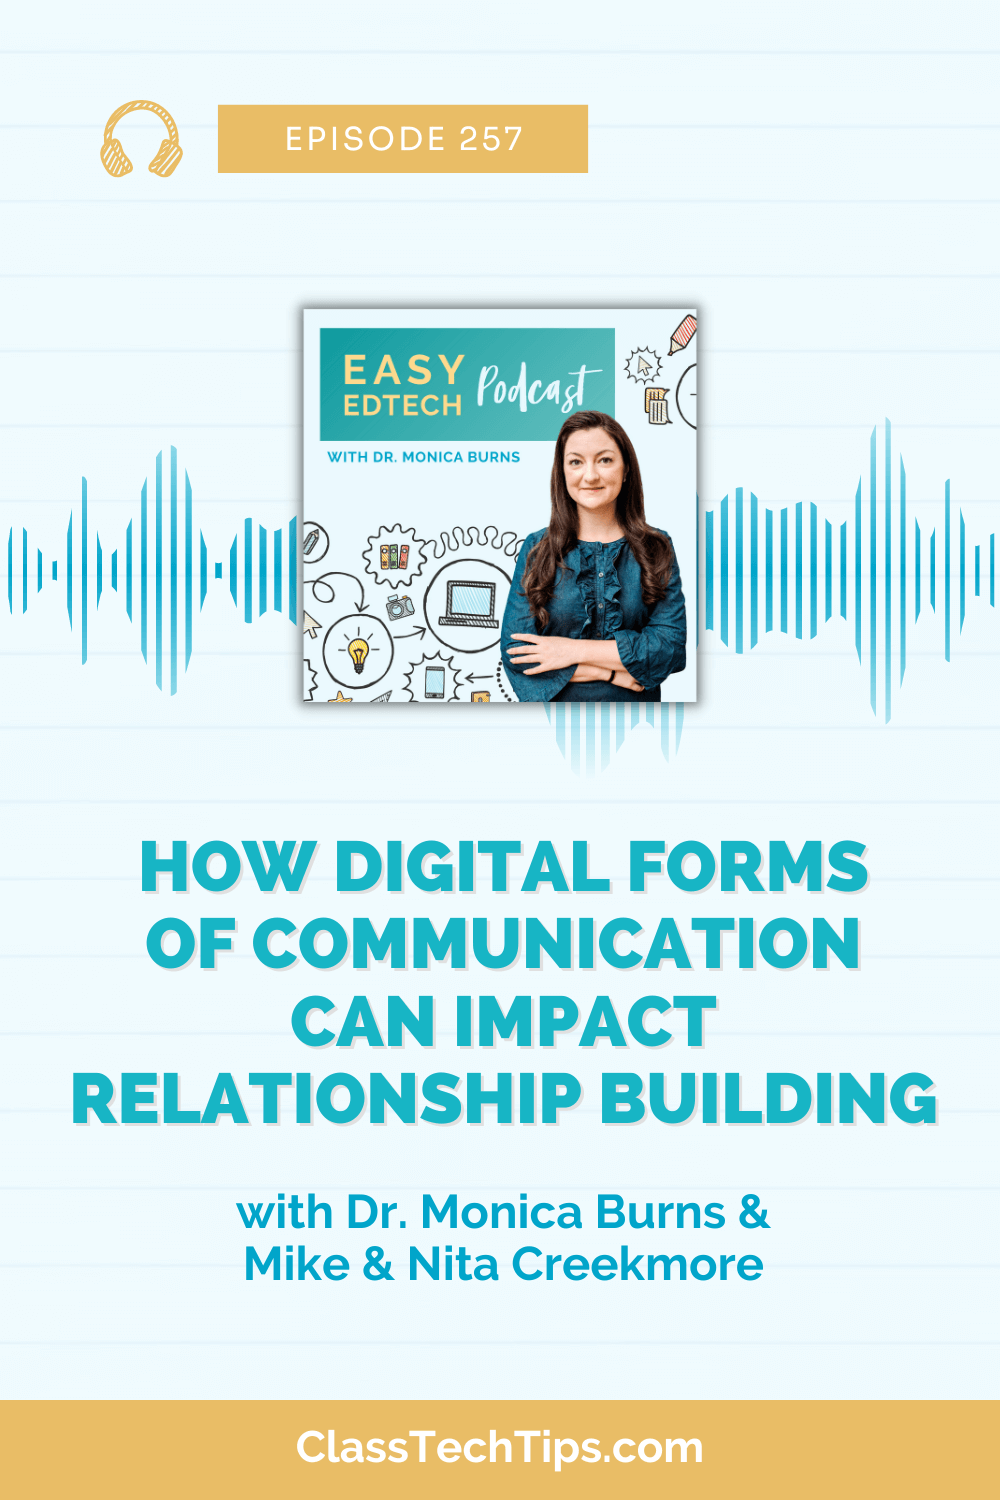 Promotional image for Easy EdTech Podcast Episode 257 featuring Dr. Monica Burns and guests Mike and Nita Creekmore. The graphic includes the podcast's title, a drawing of various educational icons like a laptop, lightbulb, and gears, and an image of Dr. Monica Burns smiling, with text highlighting the episode's focus on the impact of digital communication on relationship building in education.